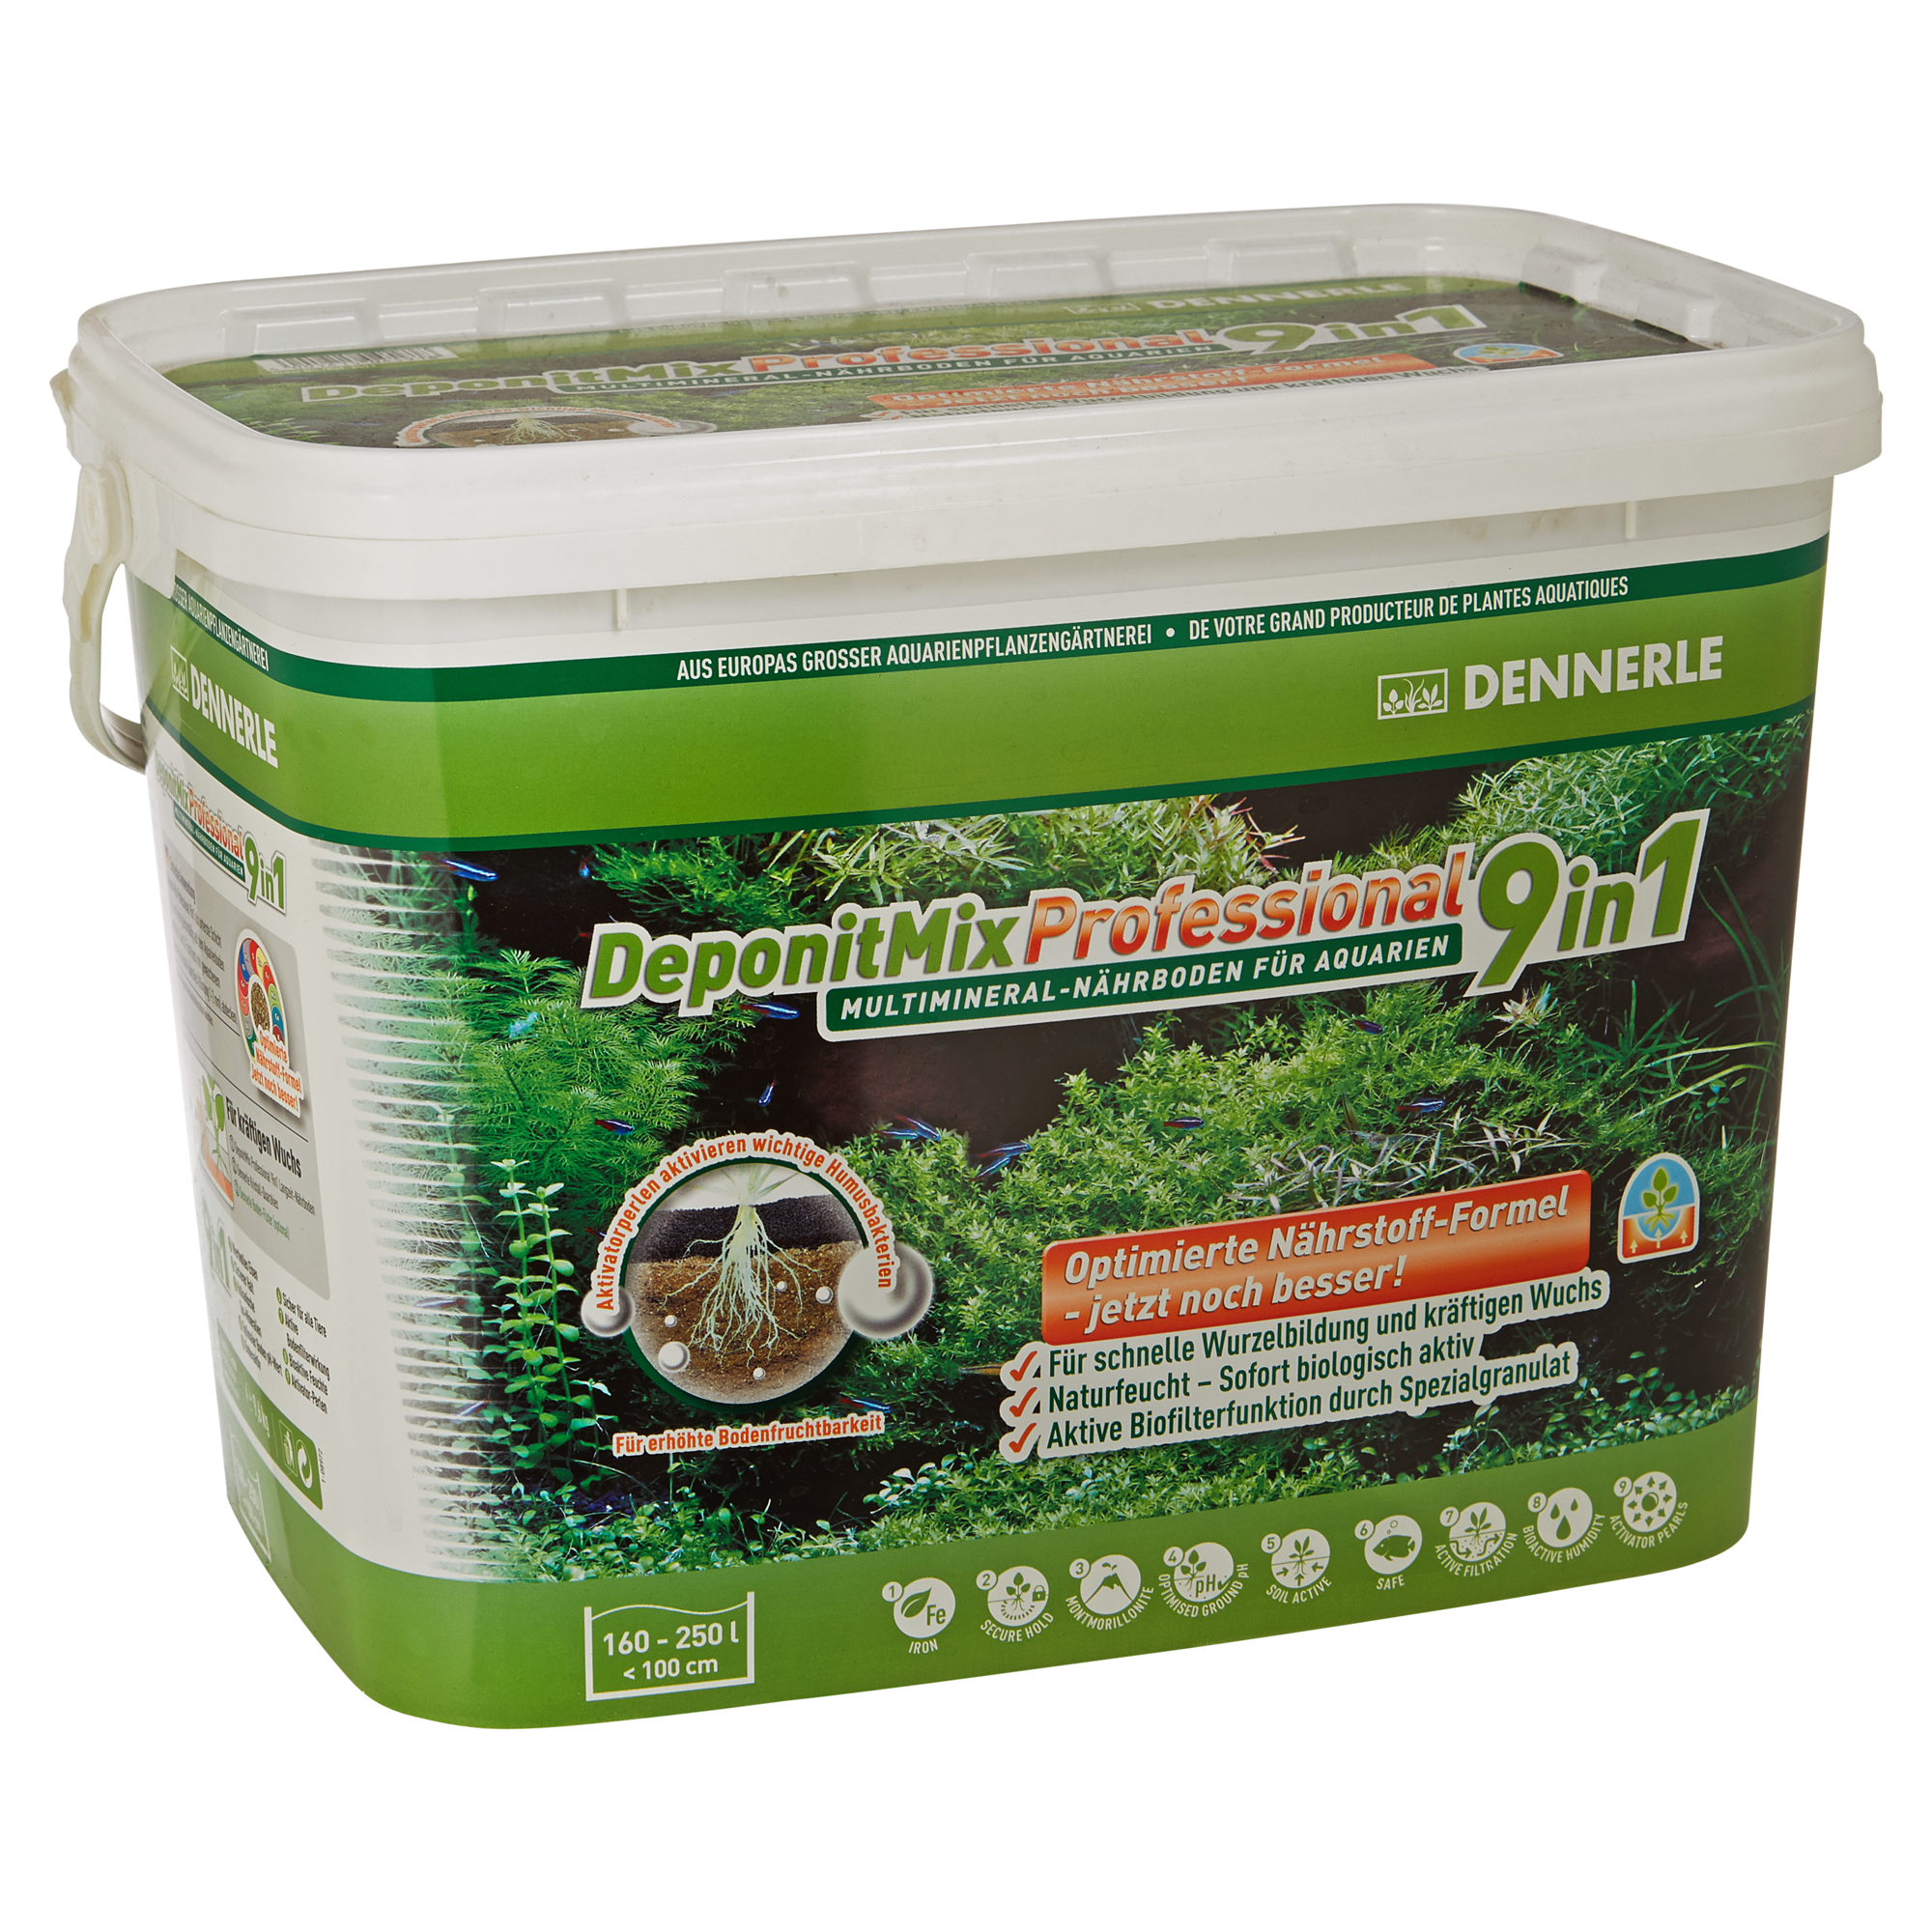 Nährboden "DeponitMix Professional 9in1" 9,6 kg + product picture